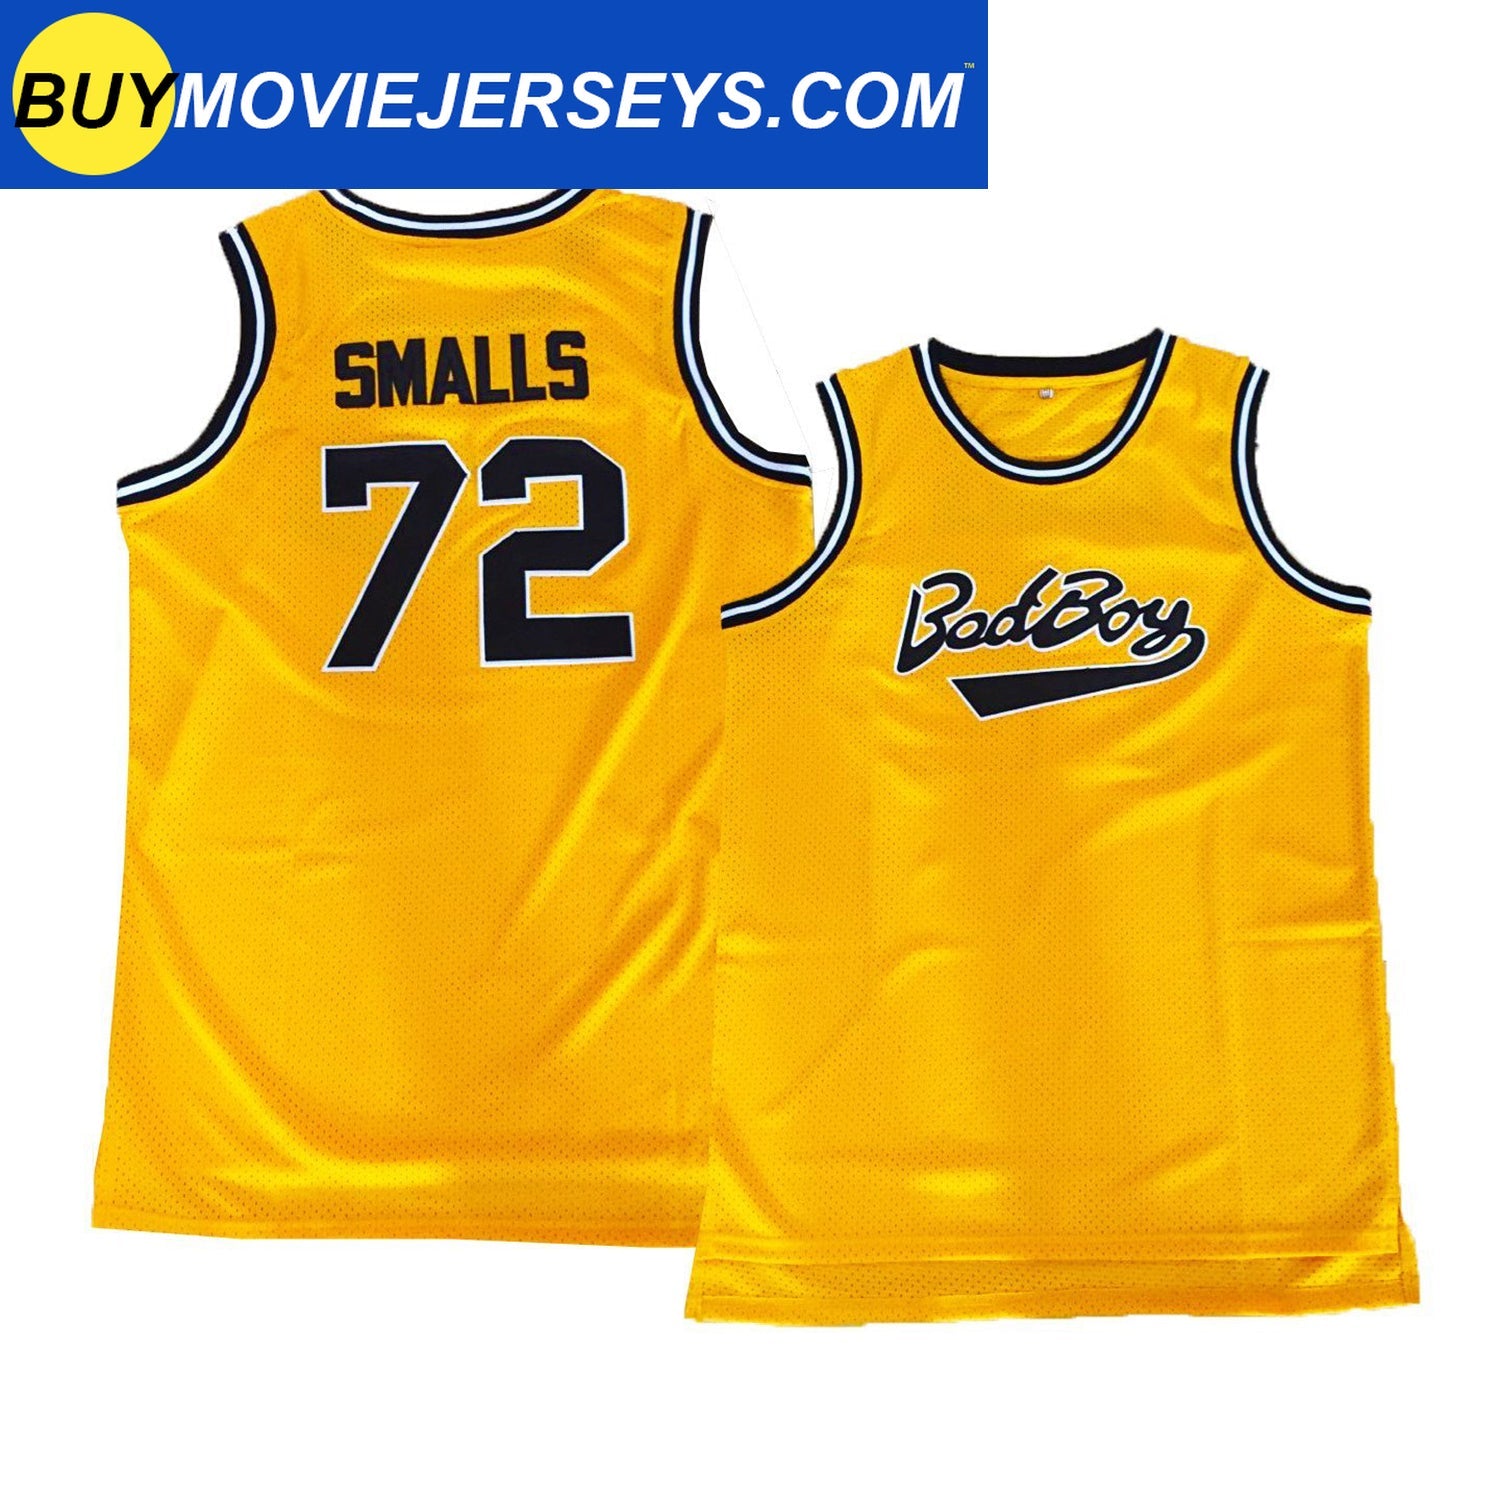 Notorious B.I.G. 97 Bad Boy Yellow Hockey Jersey Includes Patch